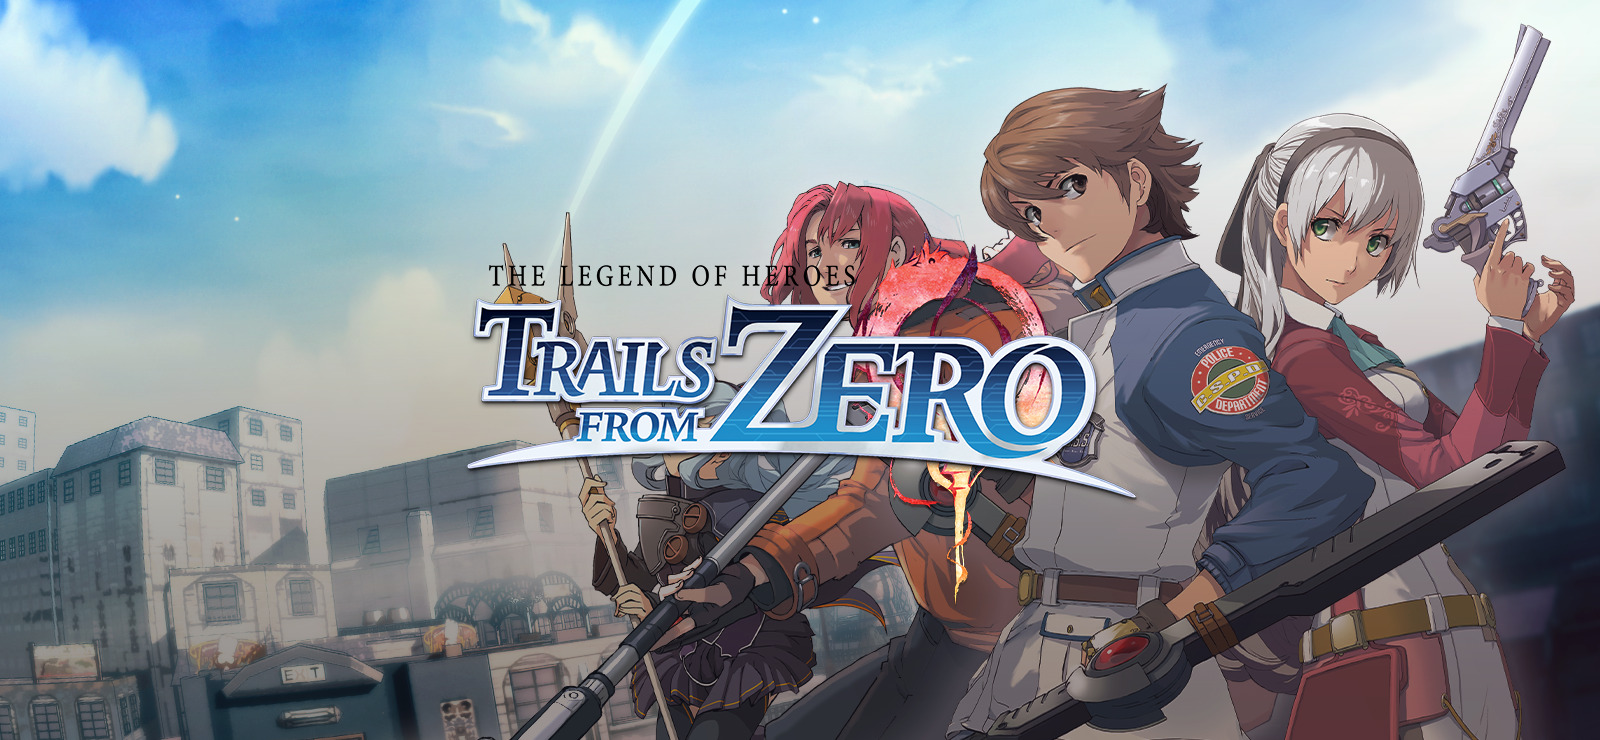 The Legend of Heroes: Trails from Zero download the new version